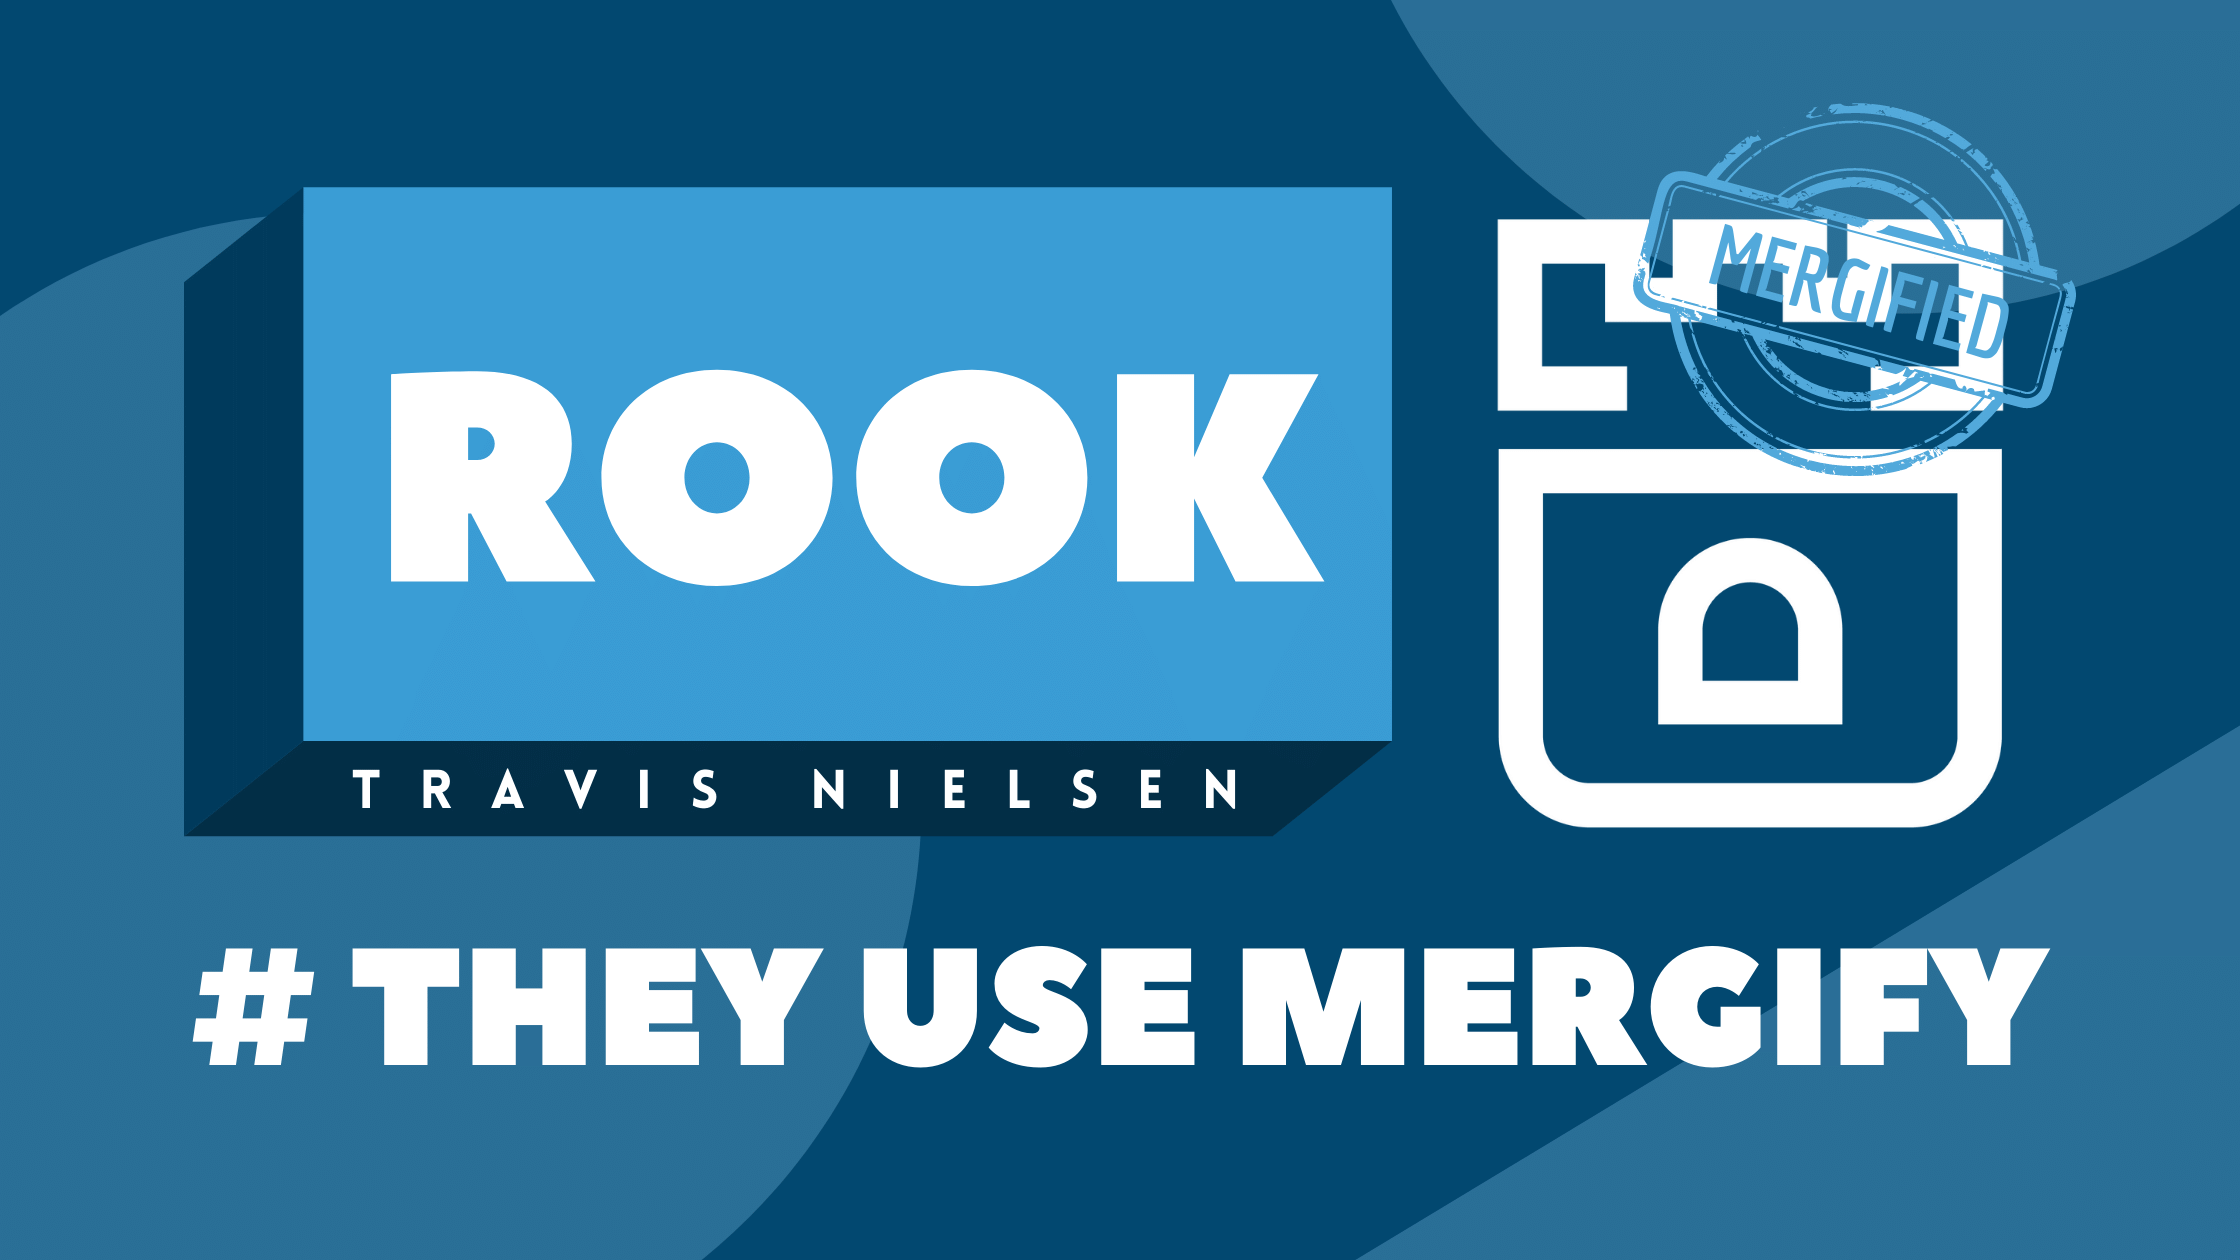 They use Mergify: Rook